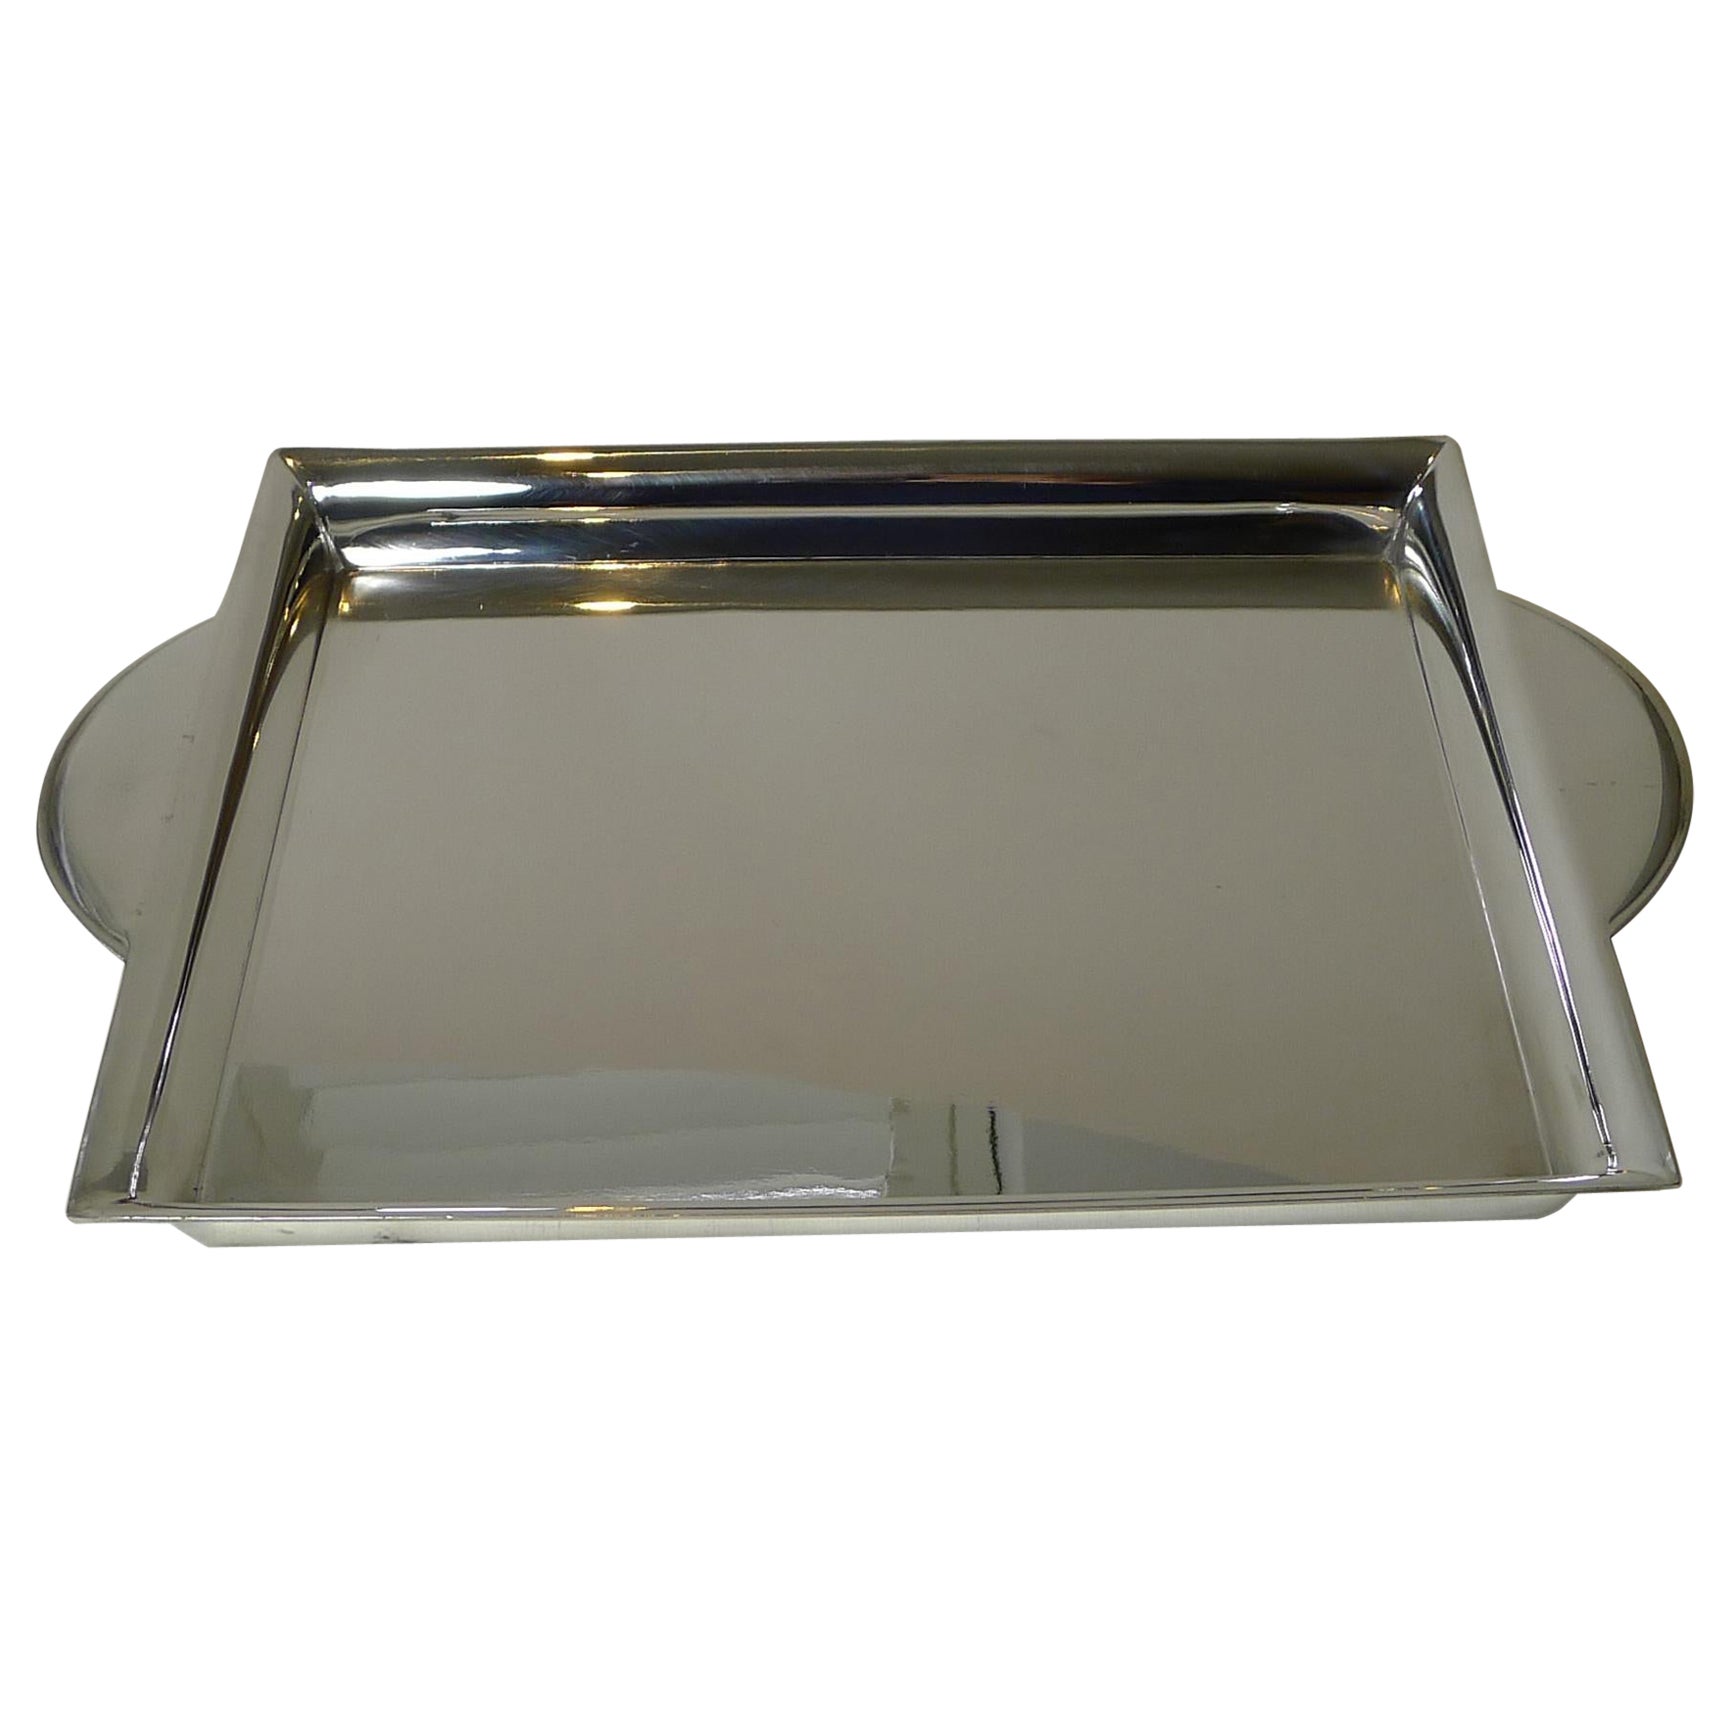 Christofle Christofle Rubans Extra Large Silver Plate Serving Tray Handles 21 X 17 Inches 